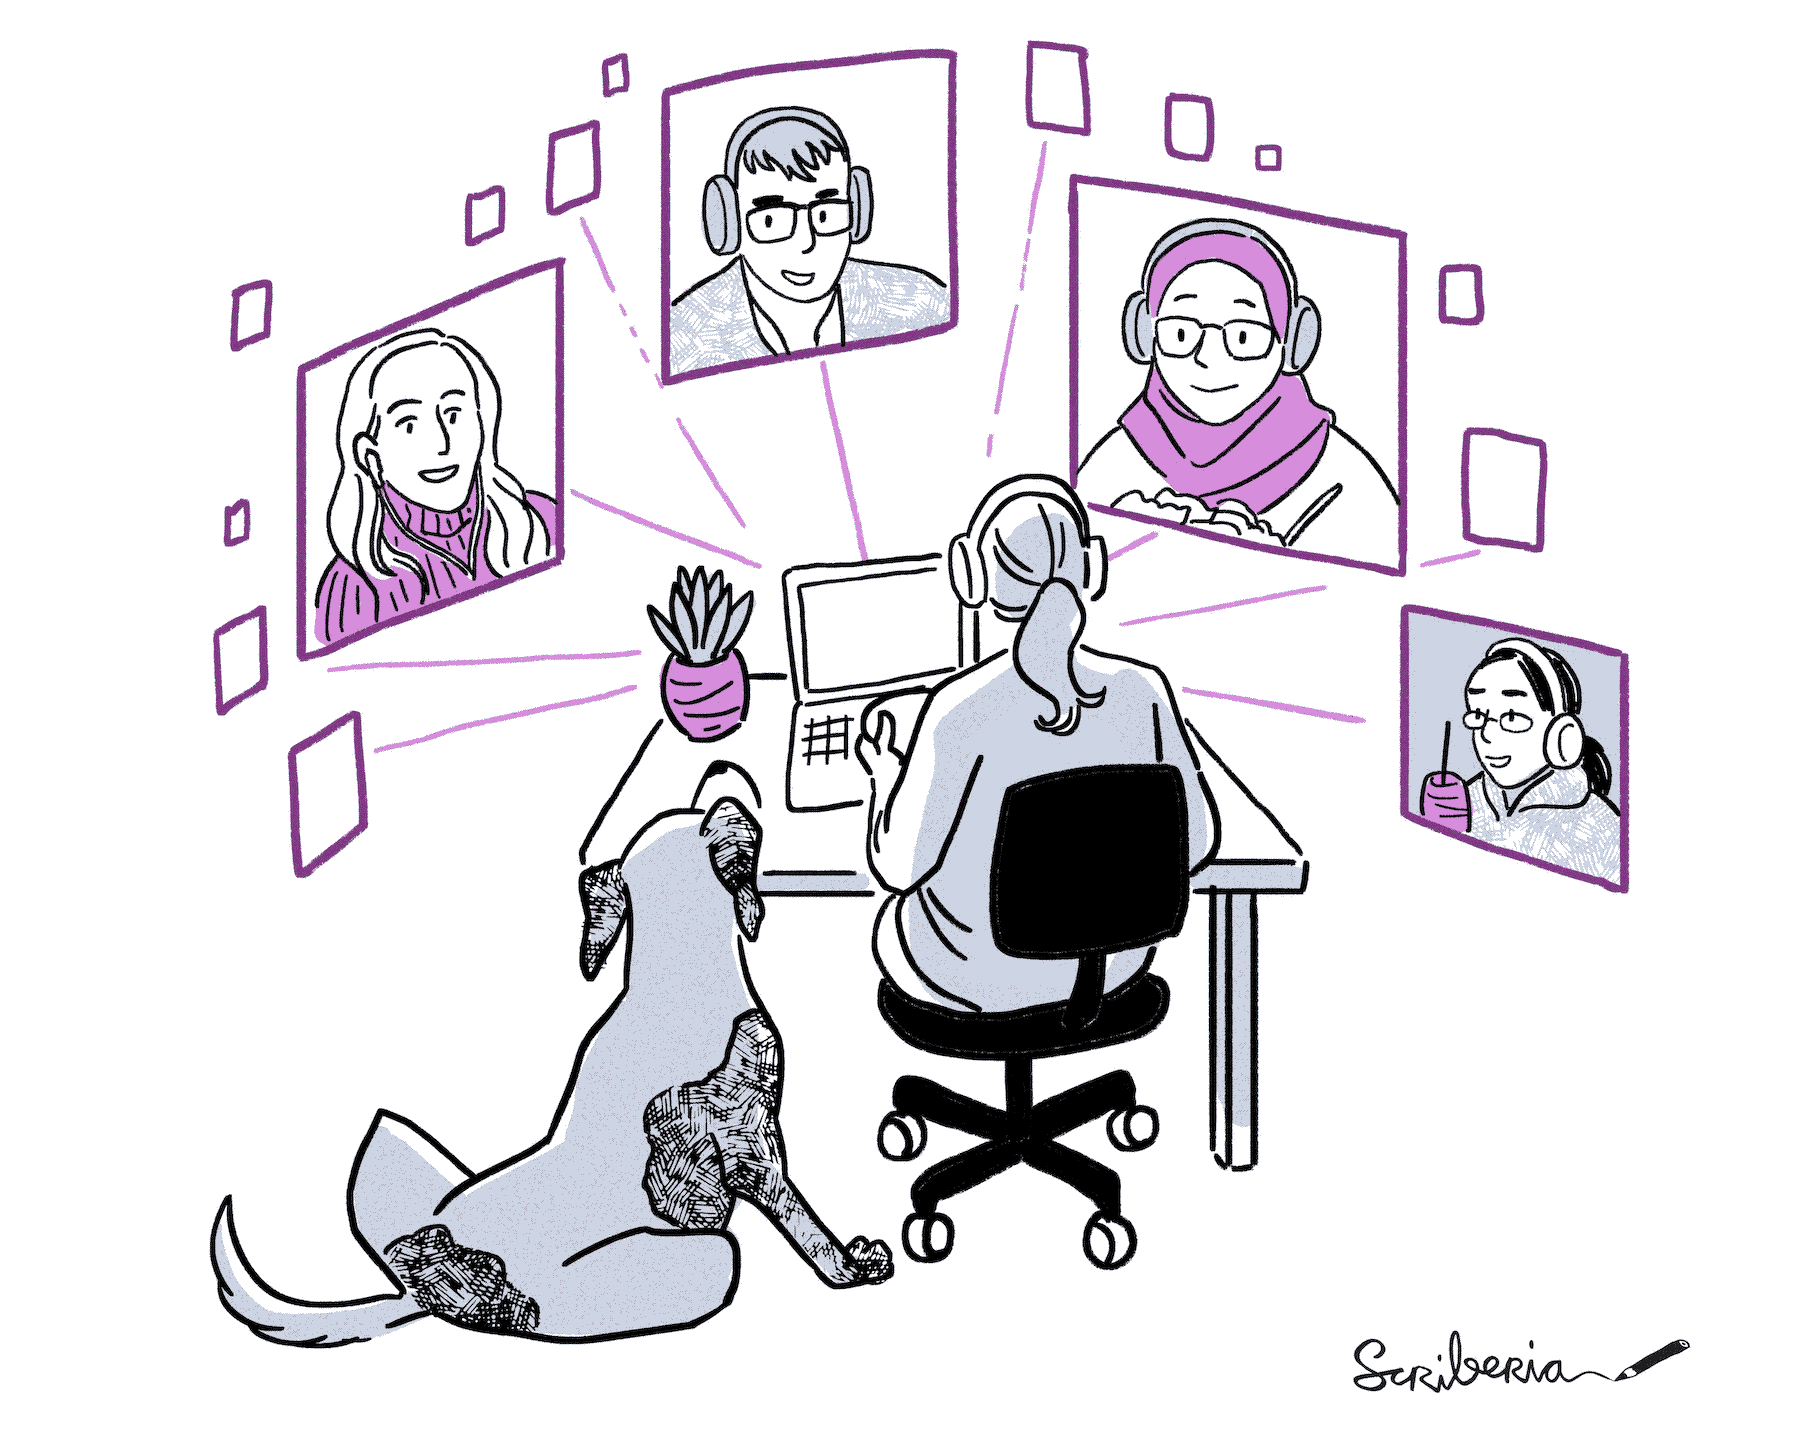 A person sitting on a chair in front of their computer with their dog beside. There are four different people who have joined online with their coffee/drinks for an informal chat.